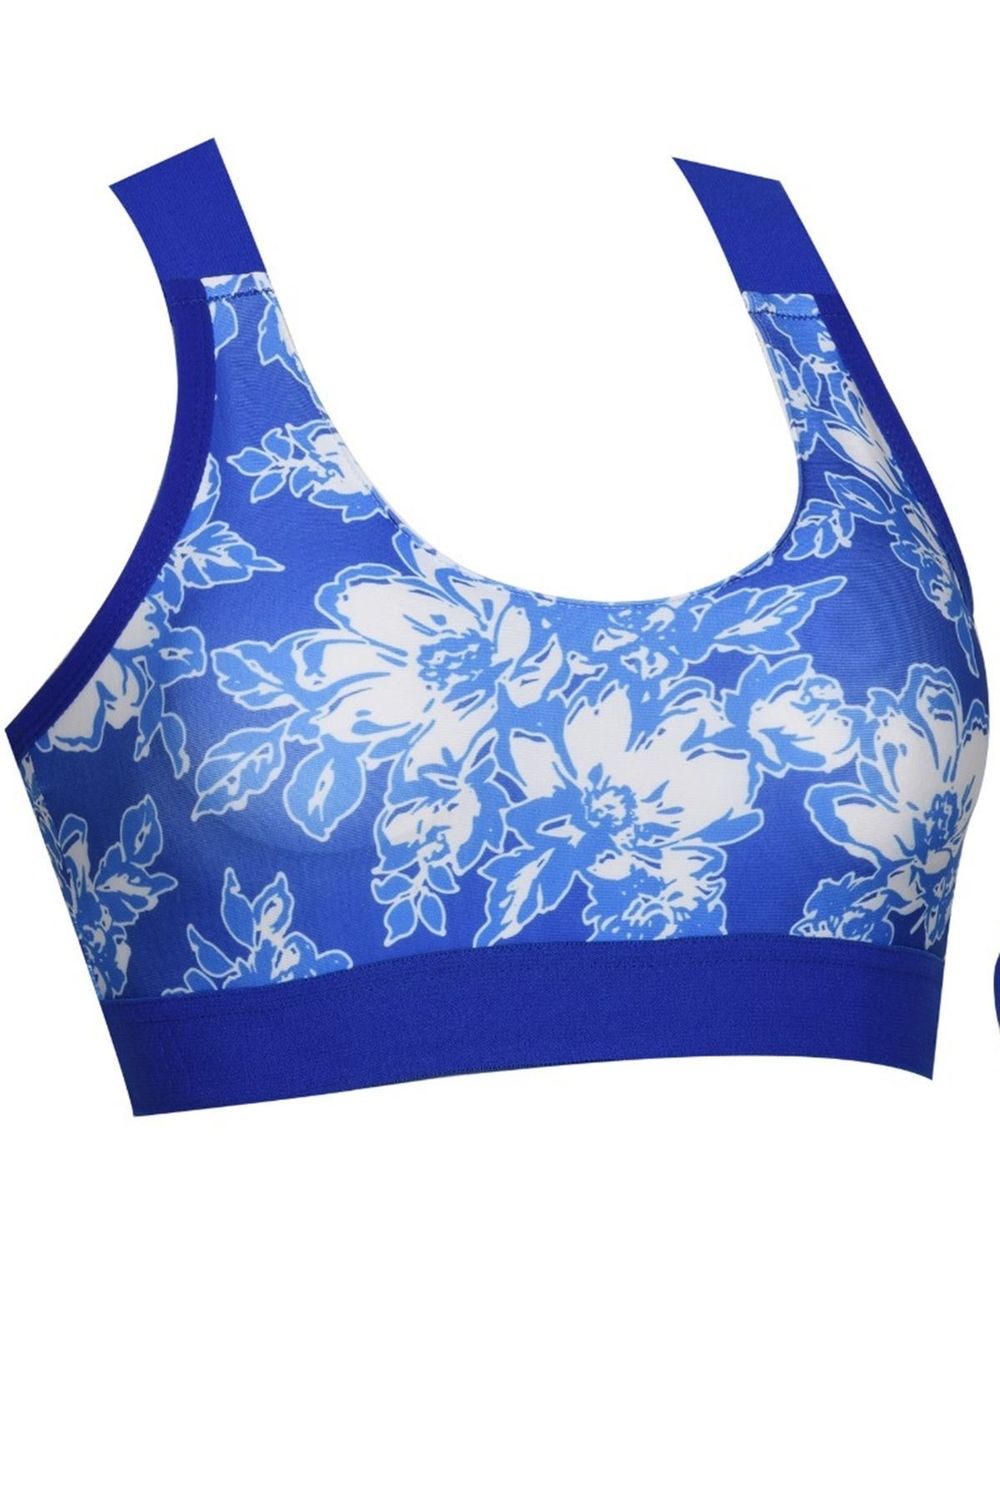 Women’s Push-Up Sports Bra in 6 Colors Sizes 2-14